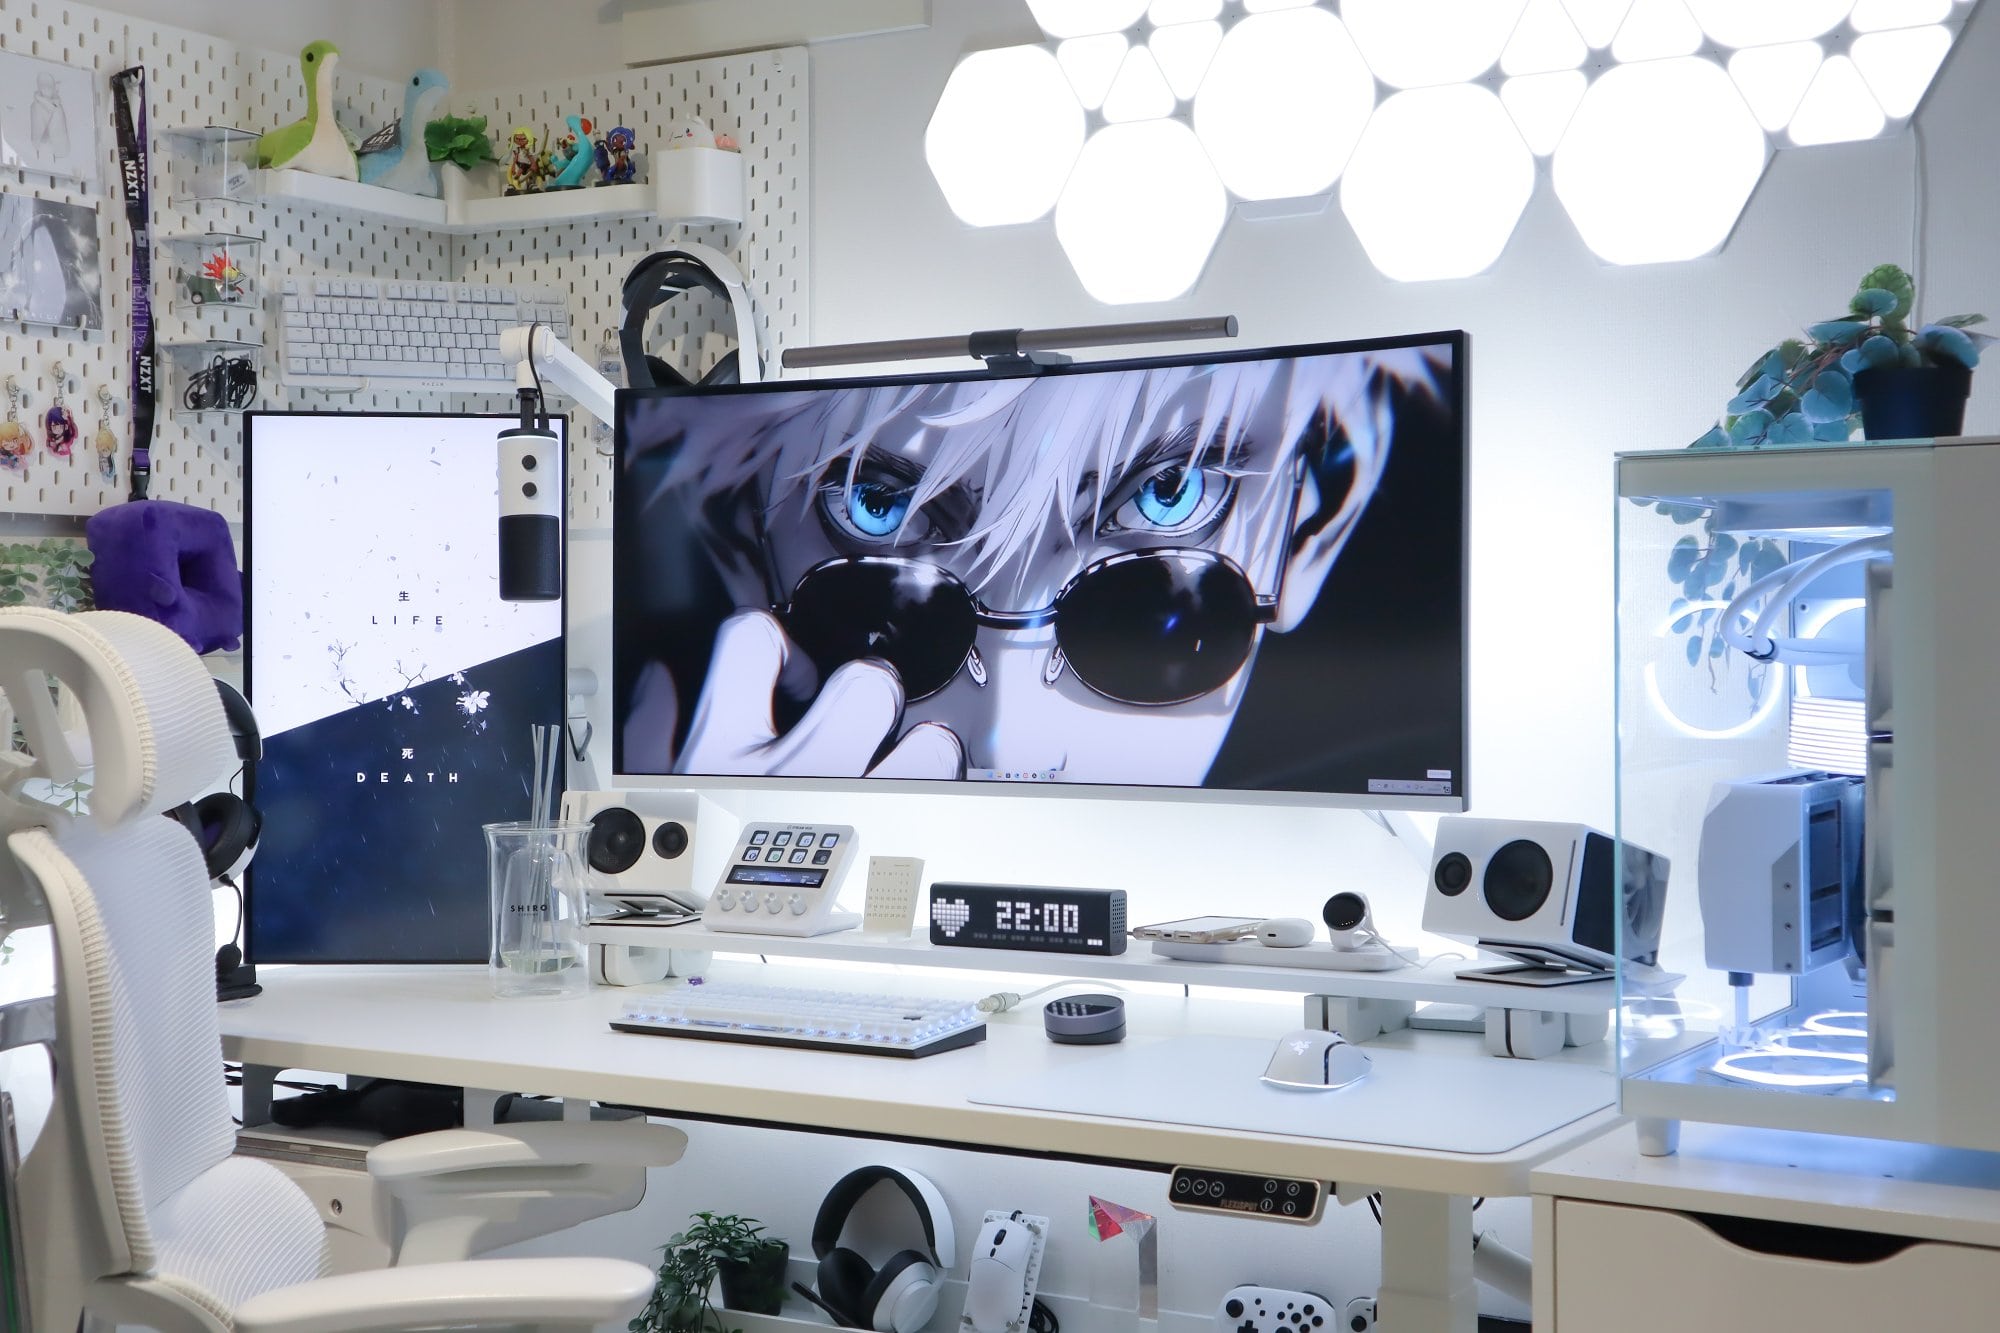 A modern and stylish desk setup with a monochromatic colour scheme, featuring an ultrawide monitor displaying an anime character, flanked by speakers and various tech gadgets